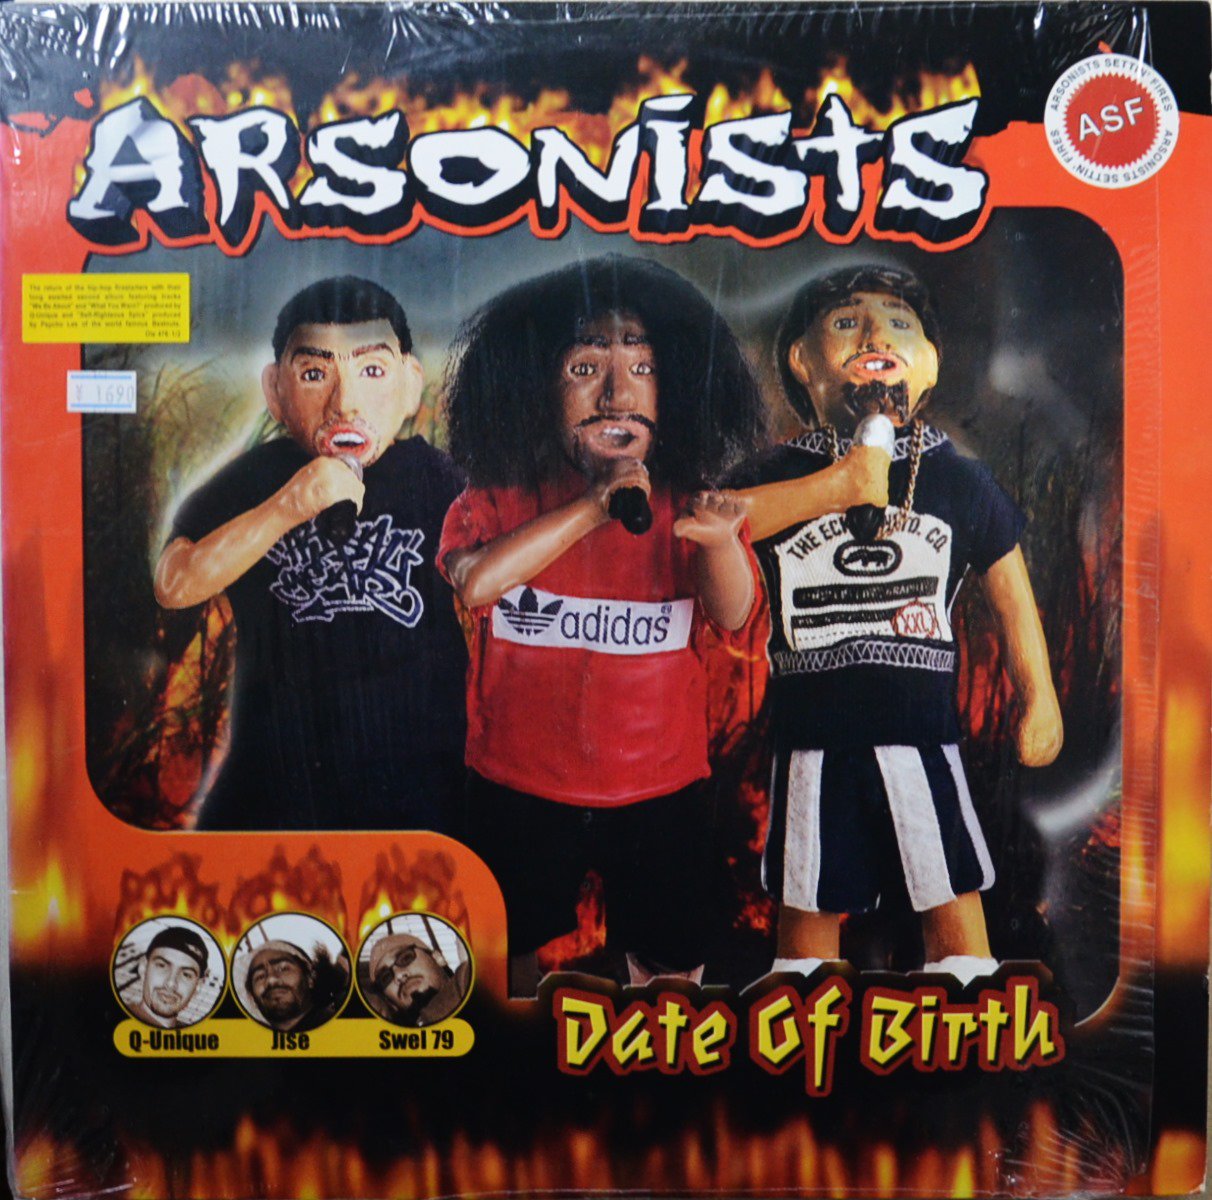 THE ARSONISTS / DATE OF BIRTH (2LP)